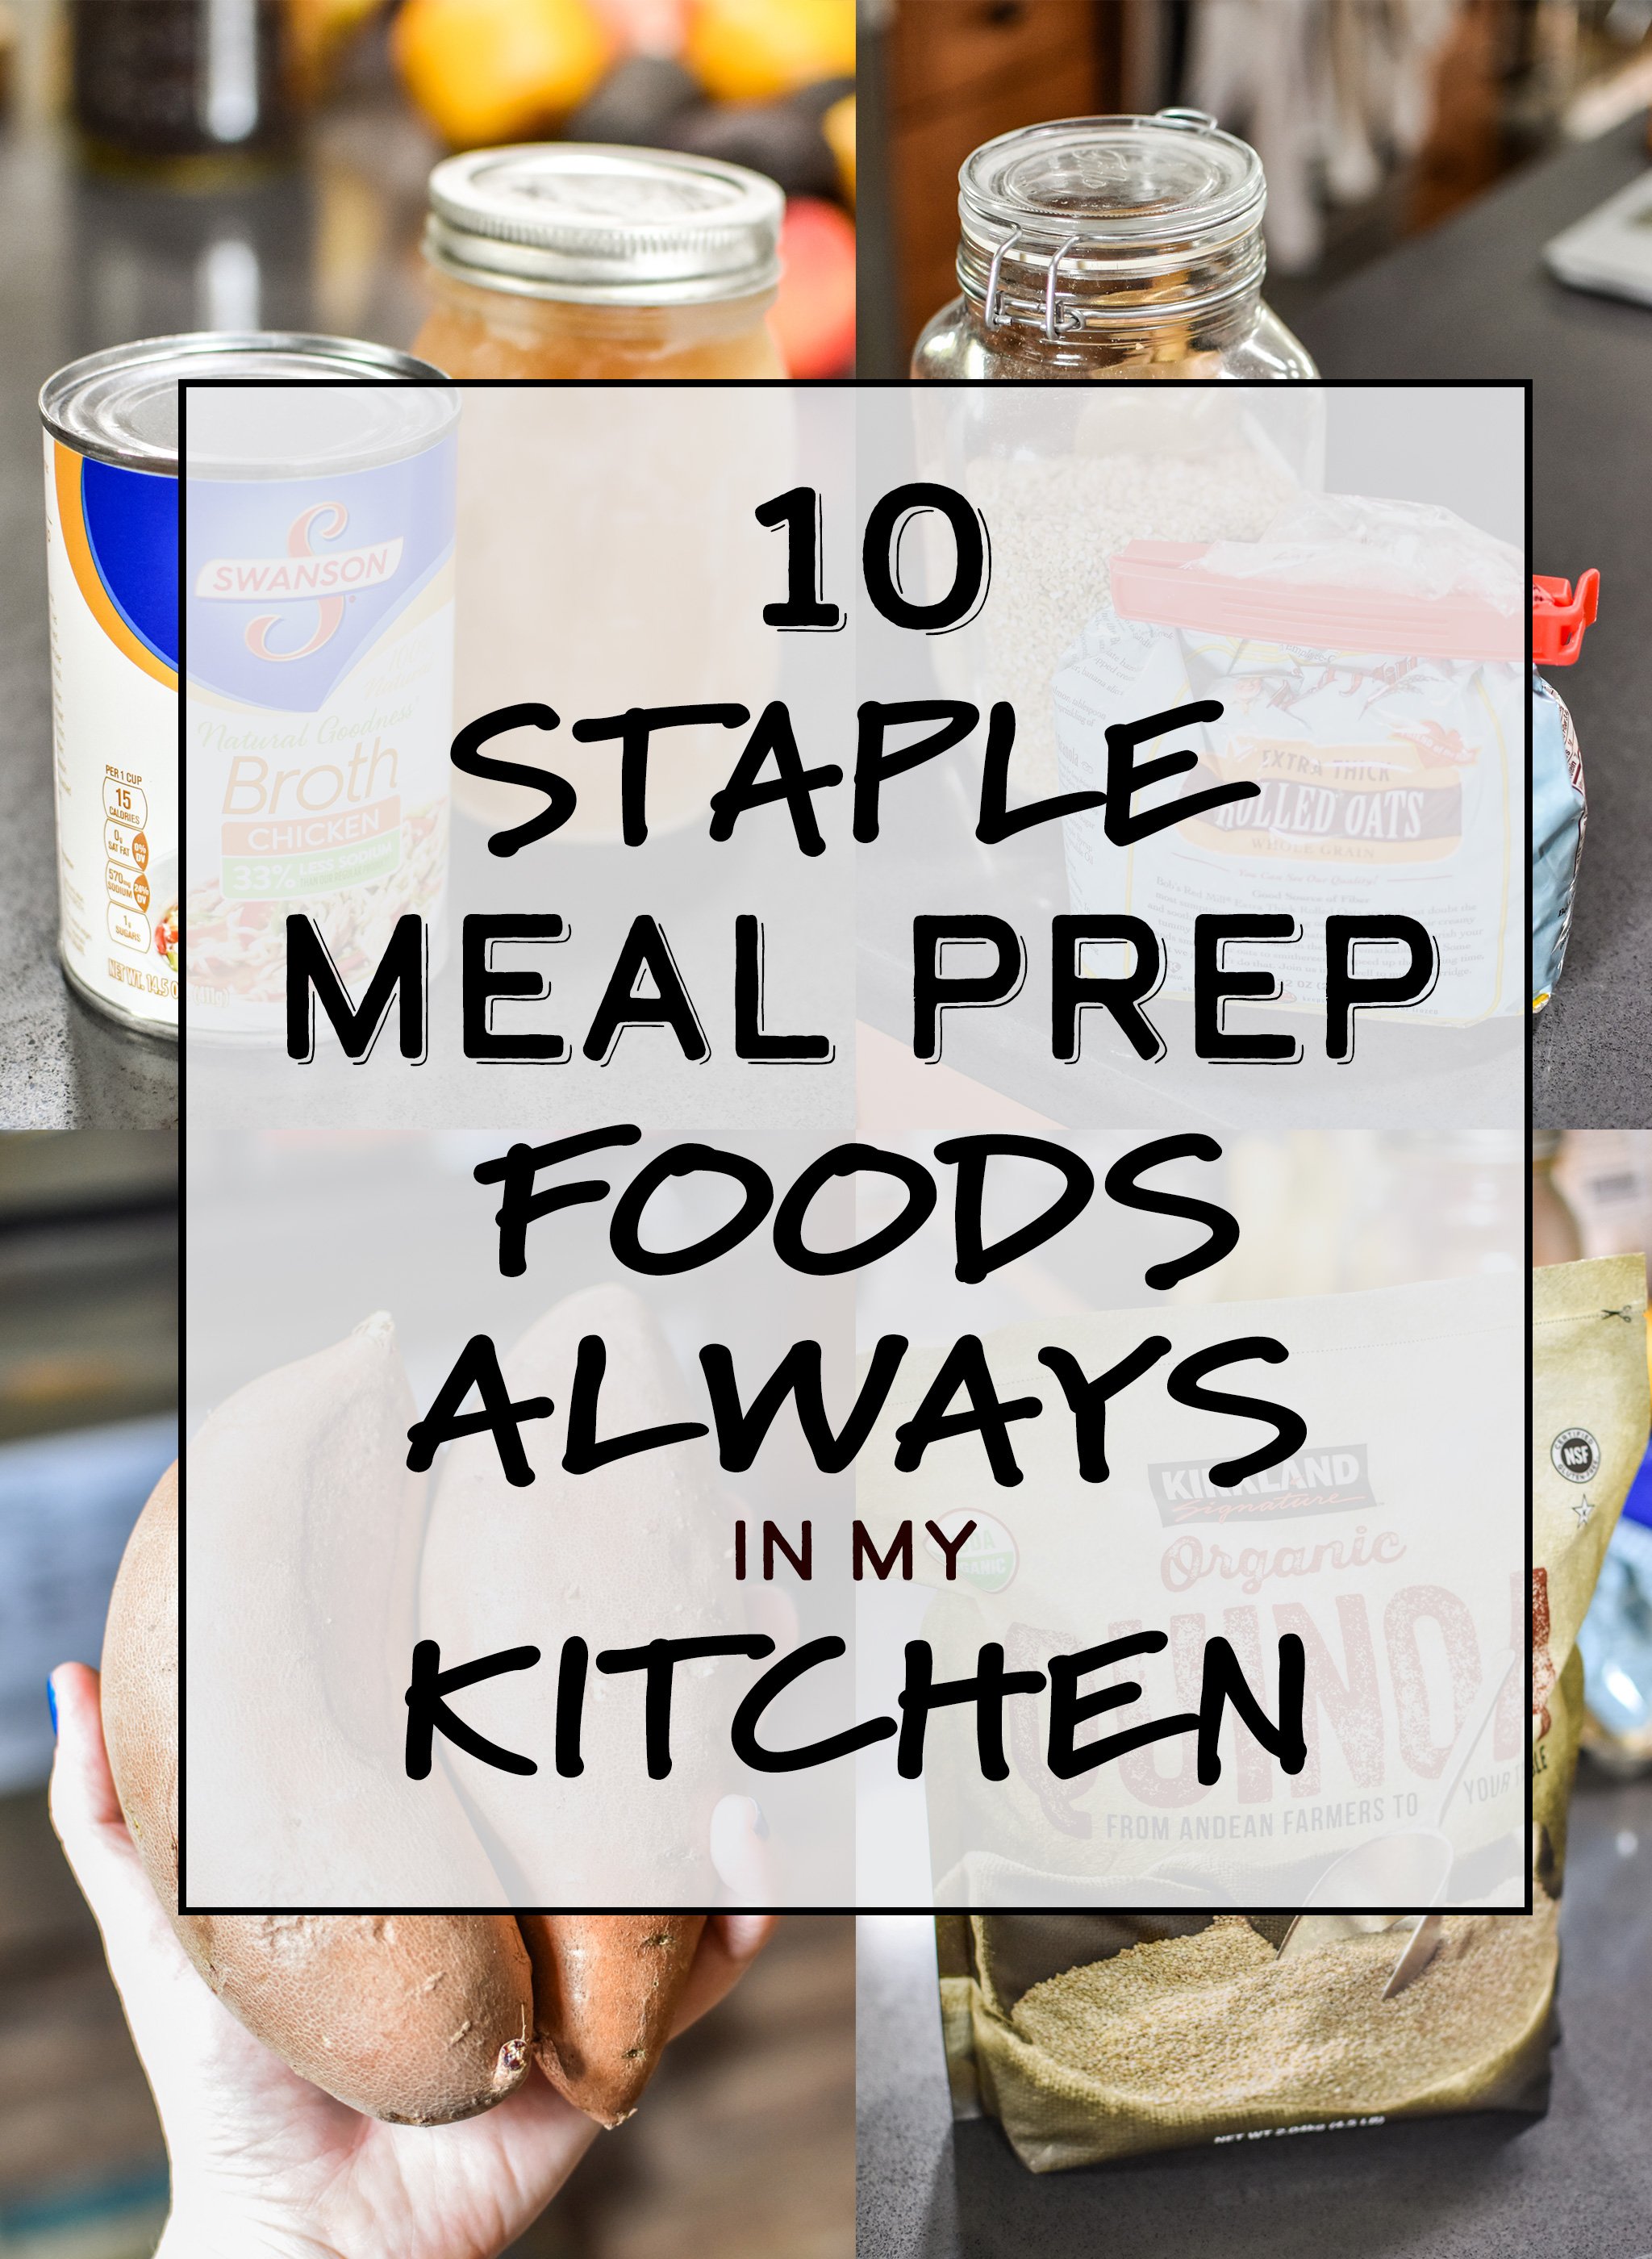 cover photo for article 10 staple meal prep foods always in my kitchen